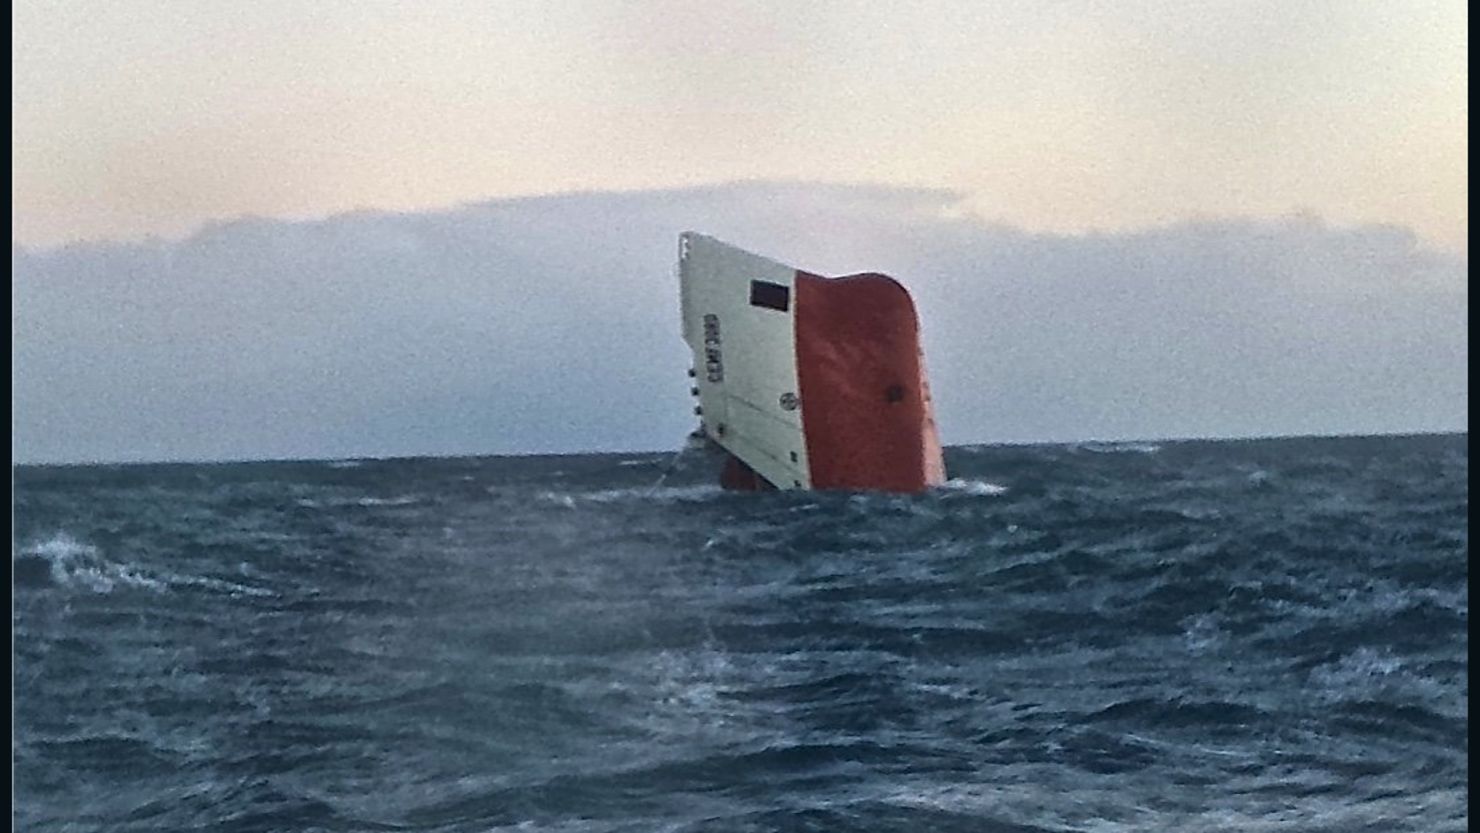 A tugboat will remain at the scene to warn other ships in the area before the search resumes at daylight for eight crew missing from the Cemfjord.